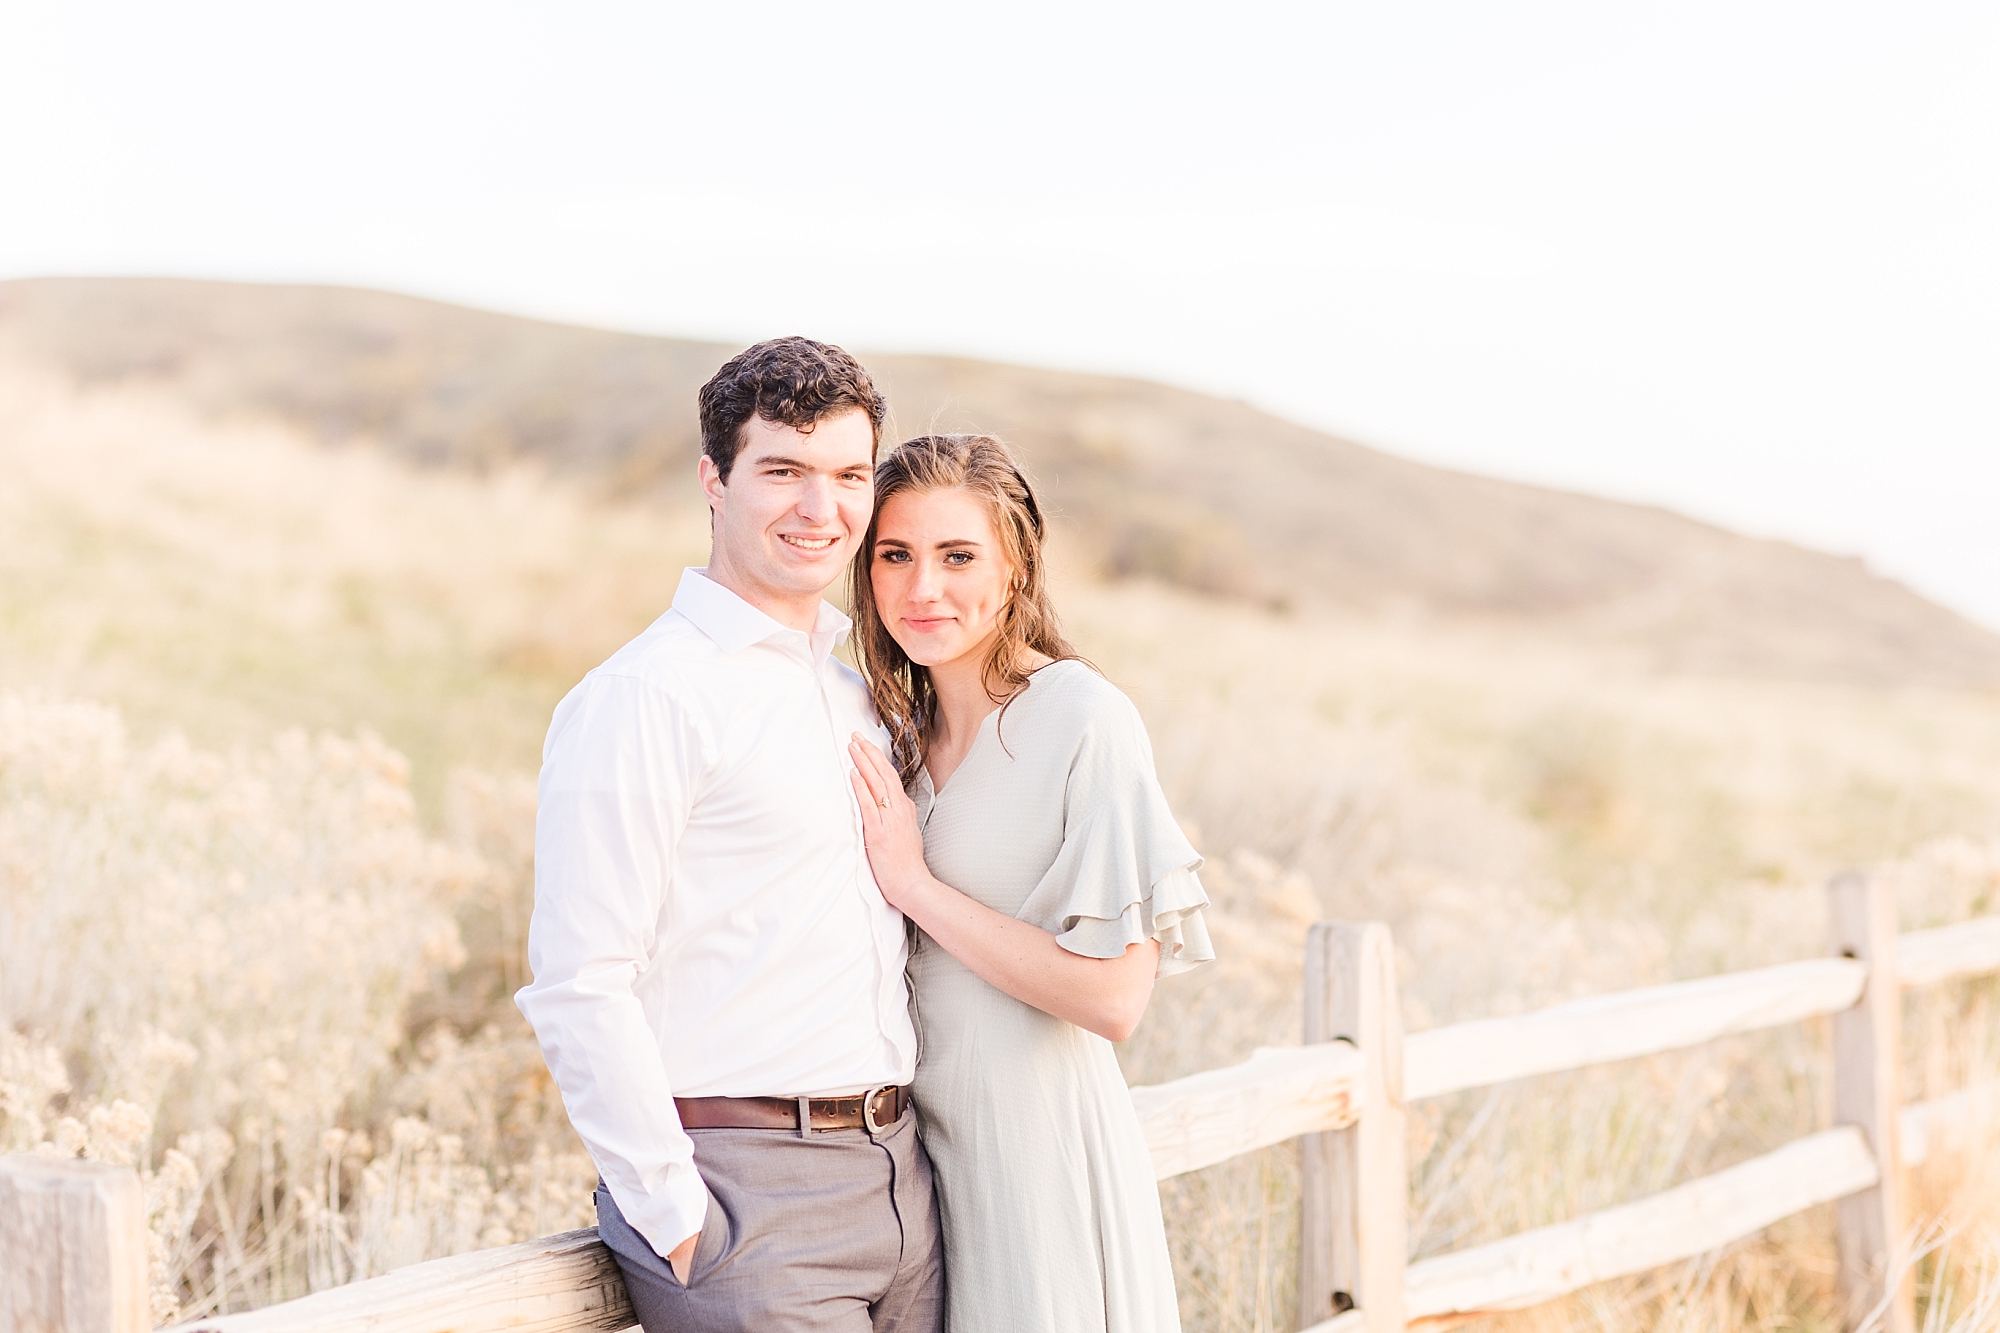 Make your Utah engagement session an adventure!